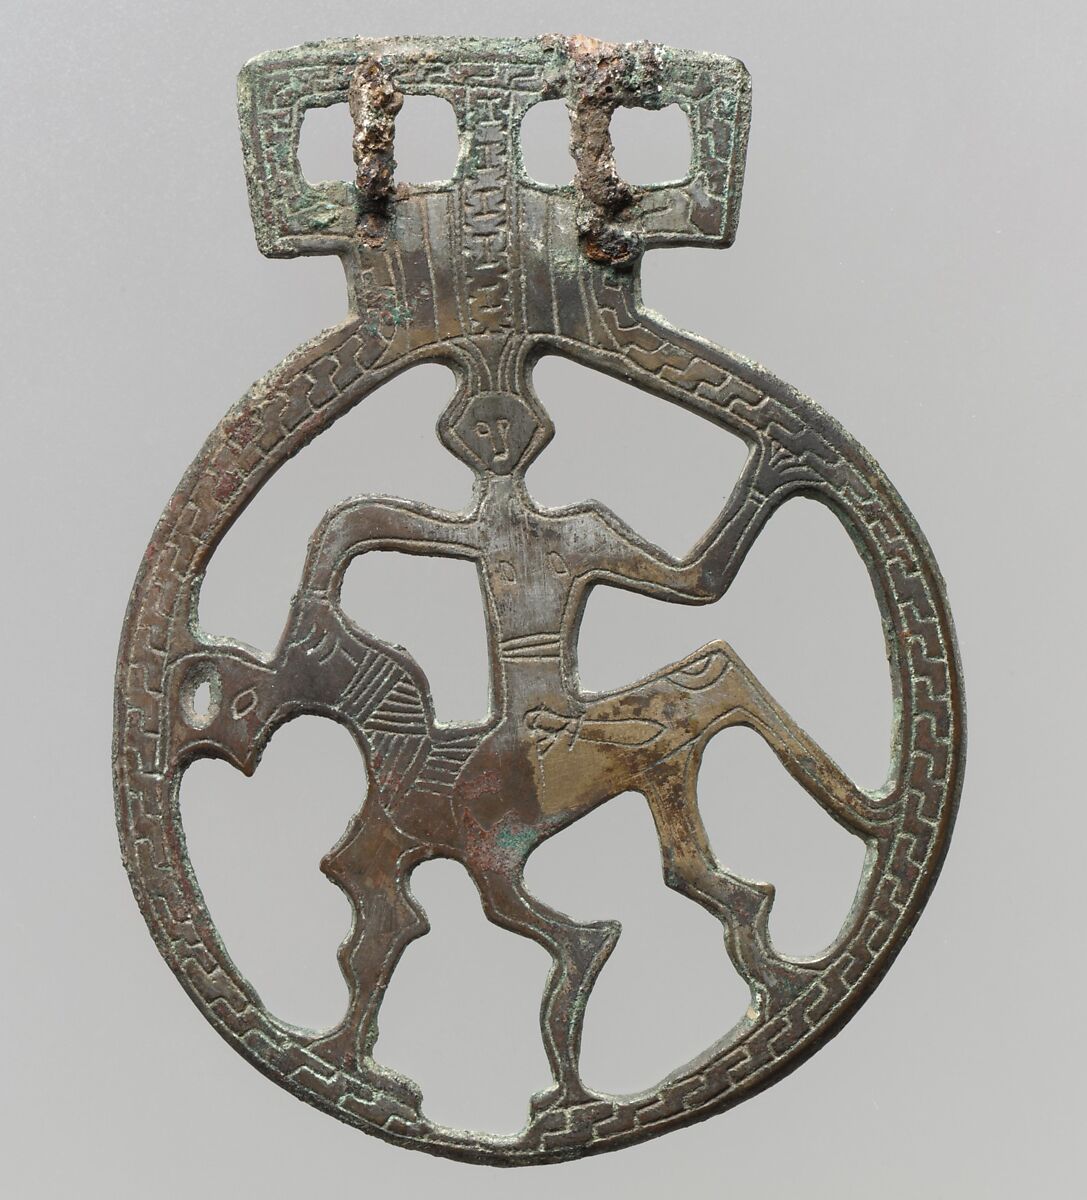 Openwork Belt Fitting, Cast copper alloy - tinned surface, engraved decoration; two integral posts on reverse; iron tongues, Frankish